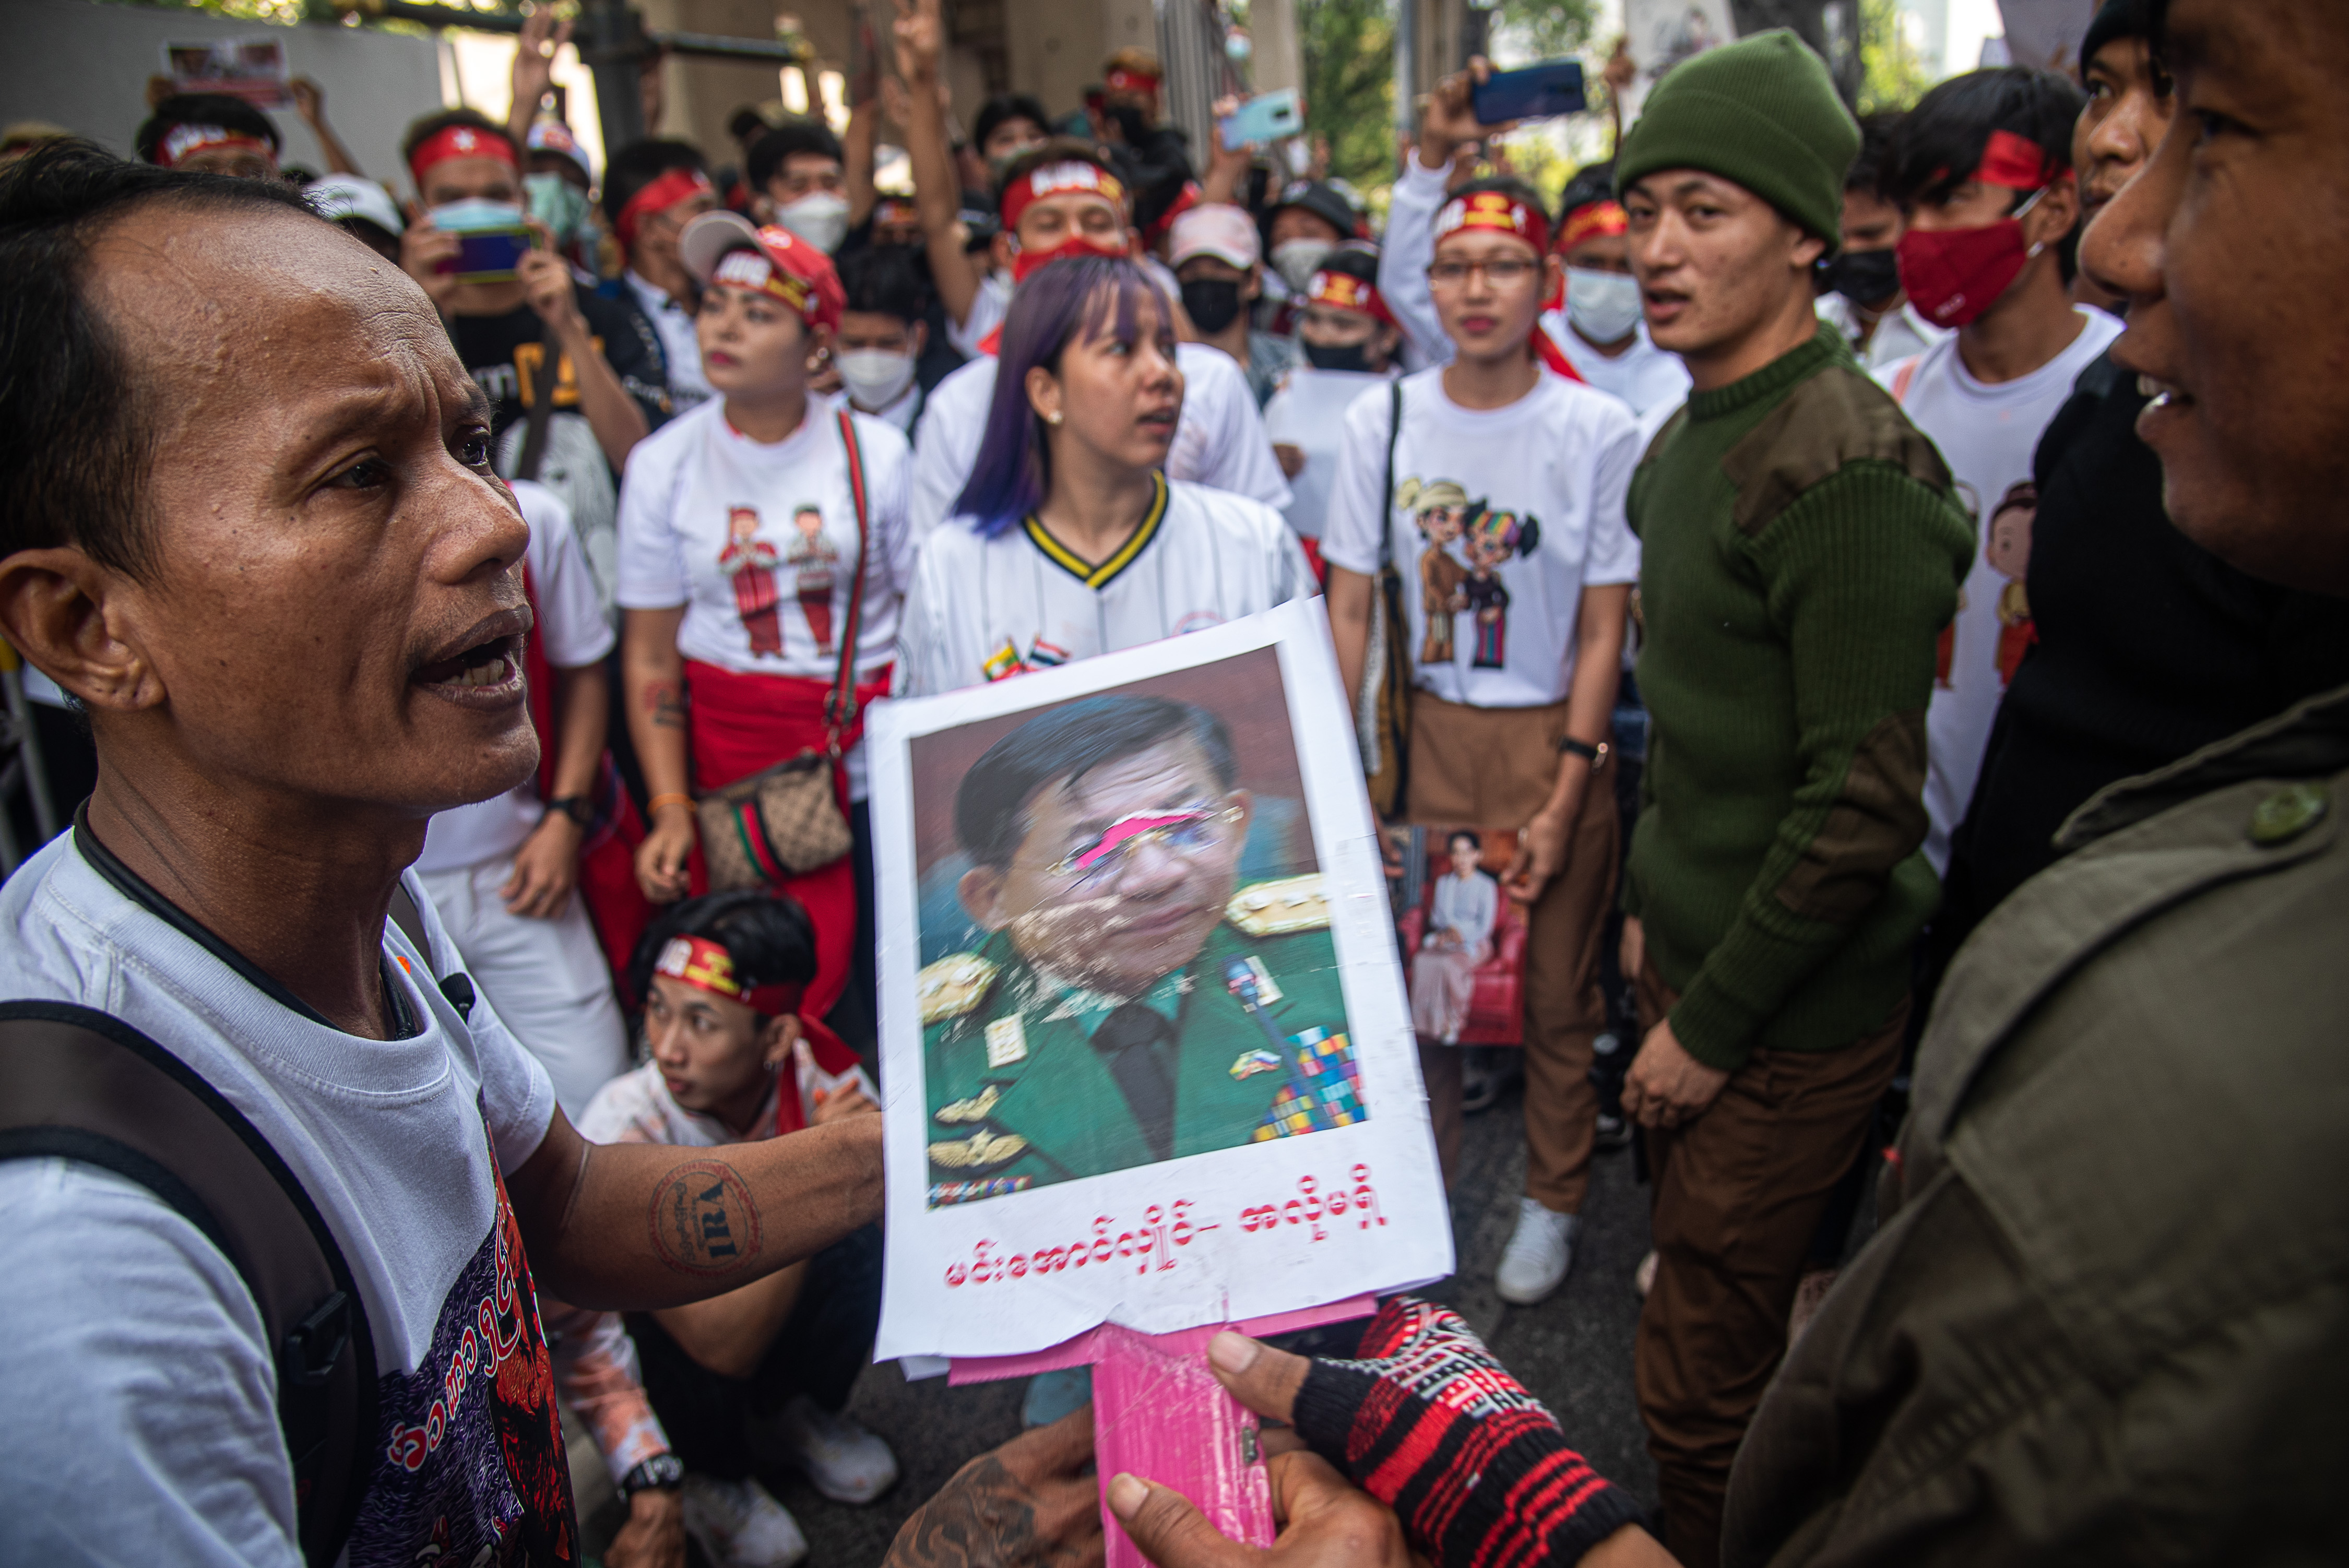 Protesters hold a portrait of Min Aung Hlaing during a demonstration while wearing matching white and red outfits